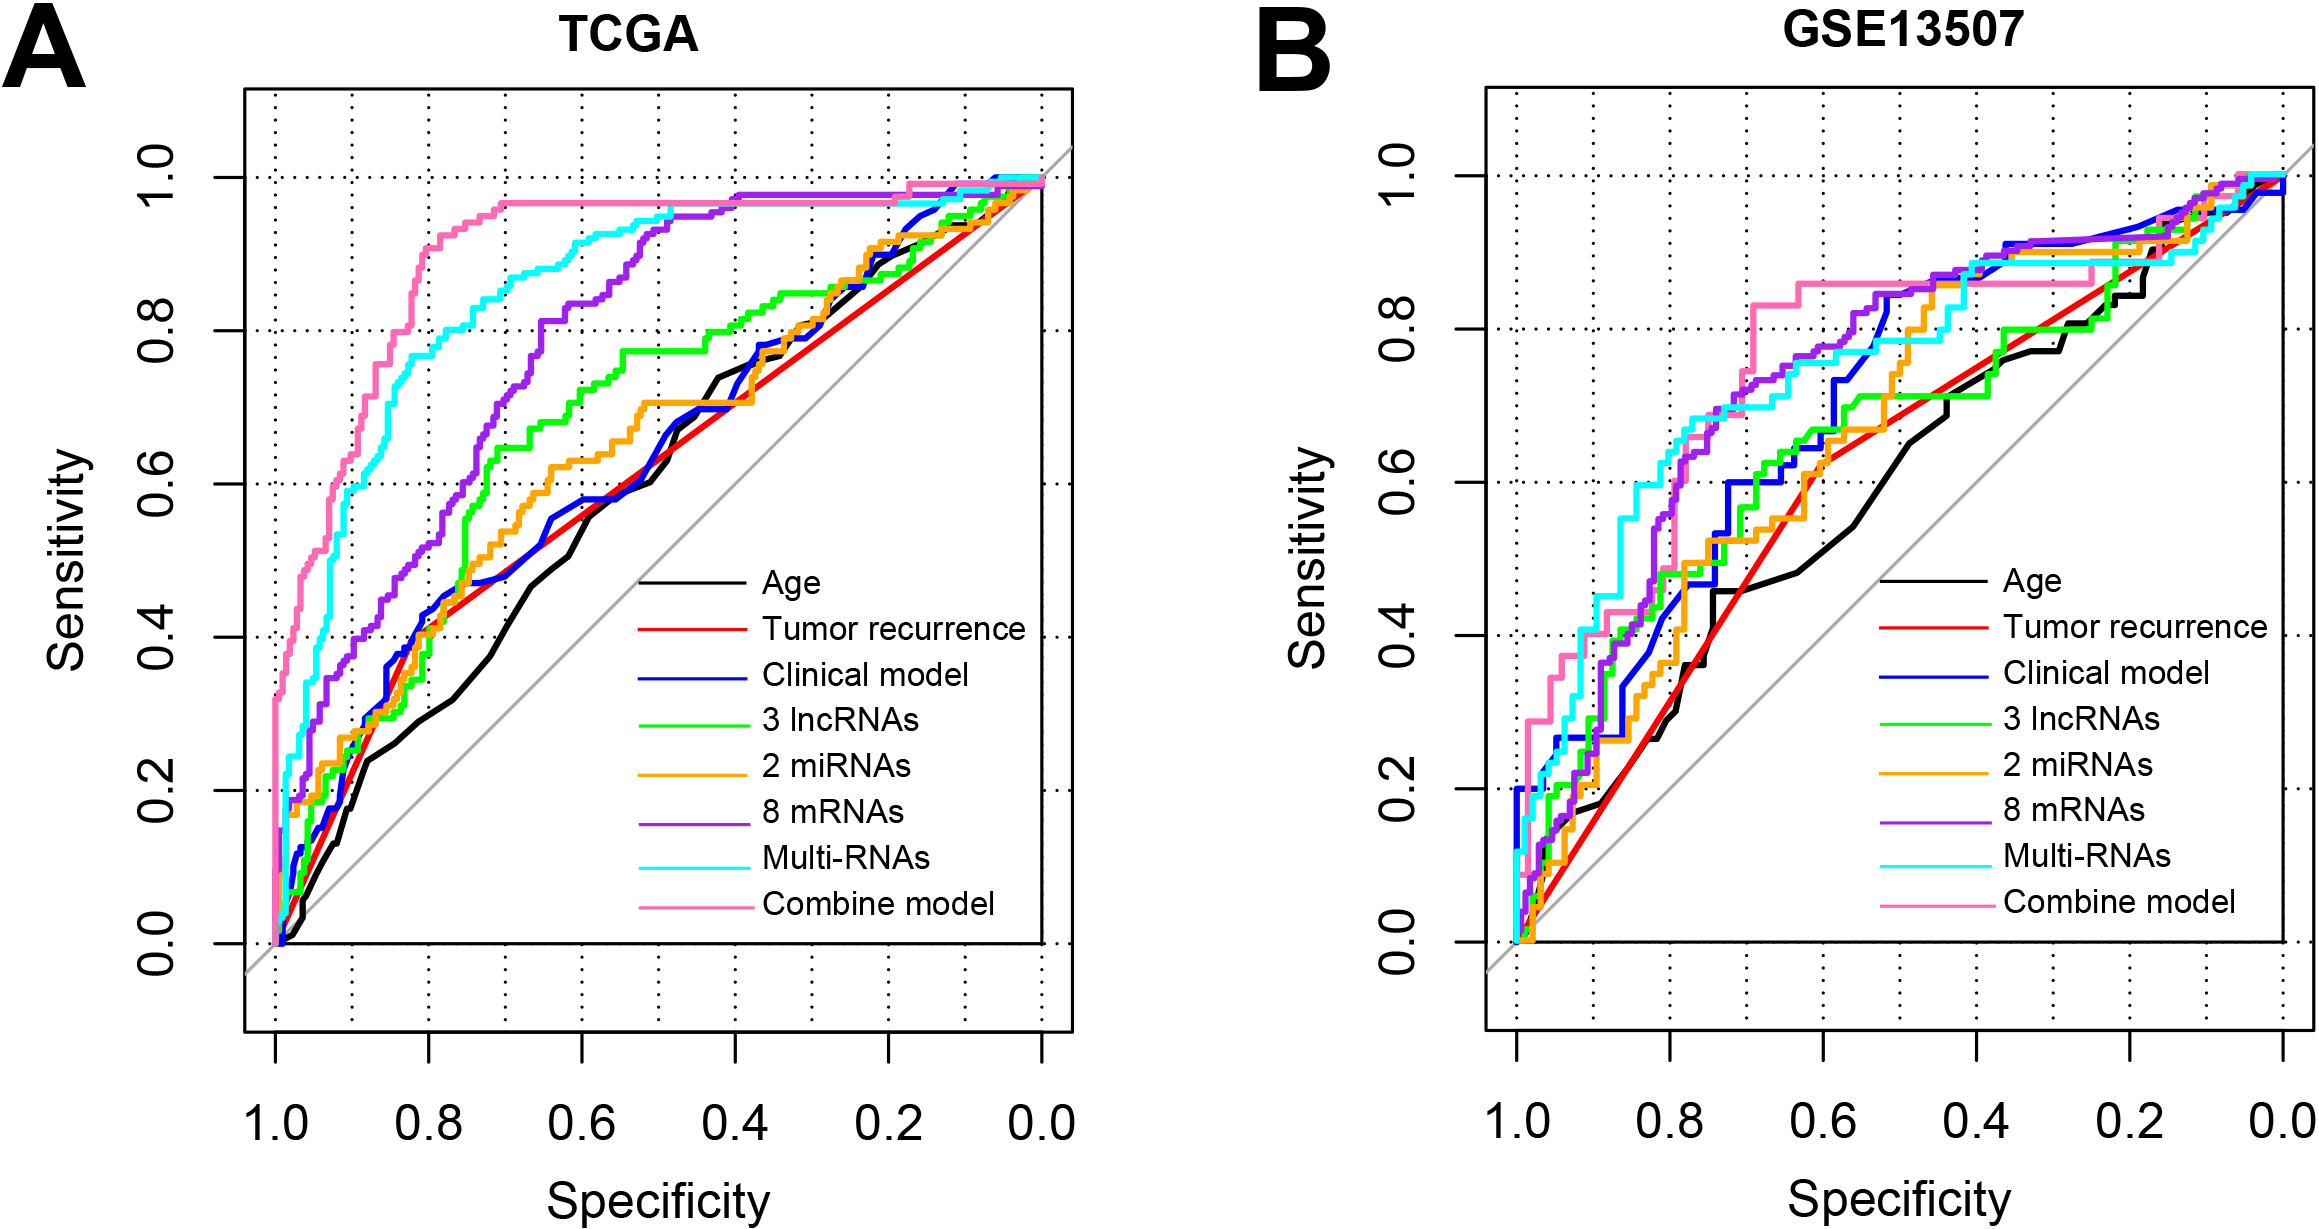 The ROC curve of training set TCGA (A) and validation set GSE13507 (B) which based on the results of each type of model.